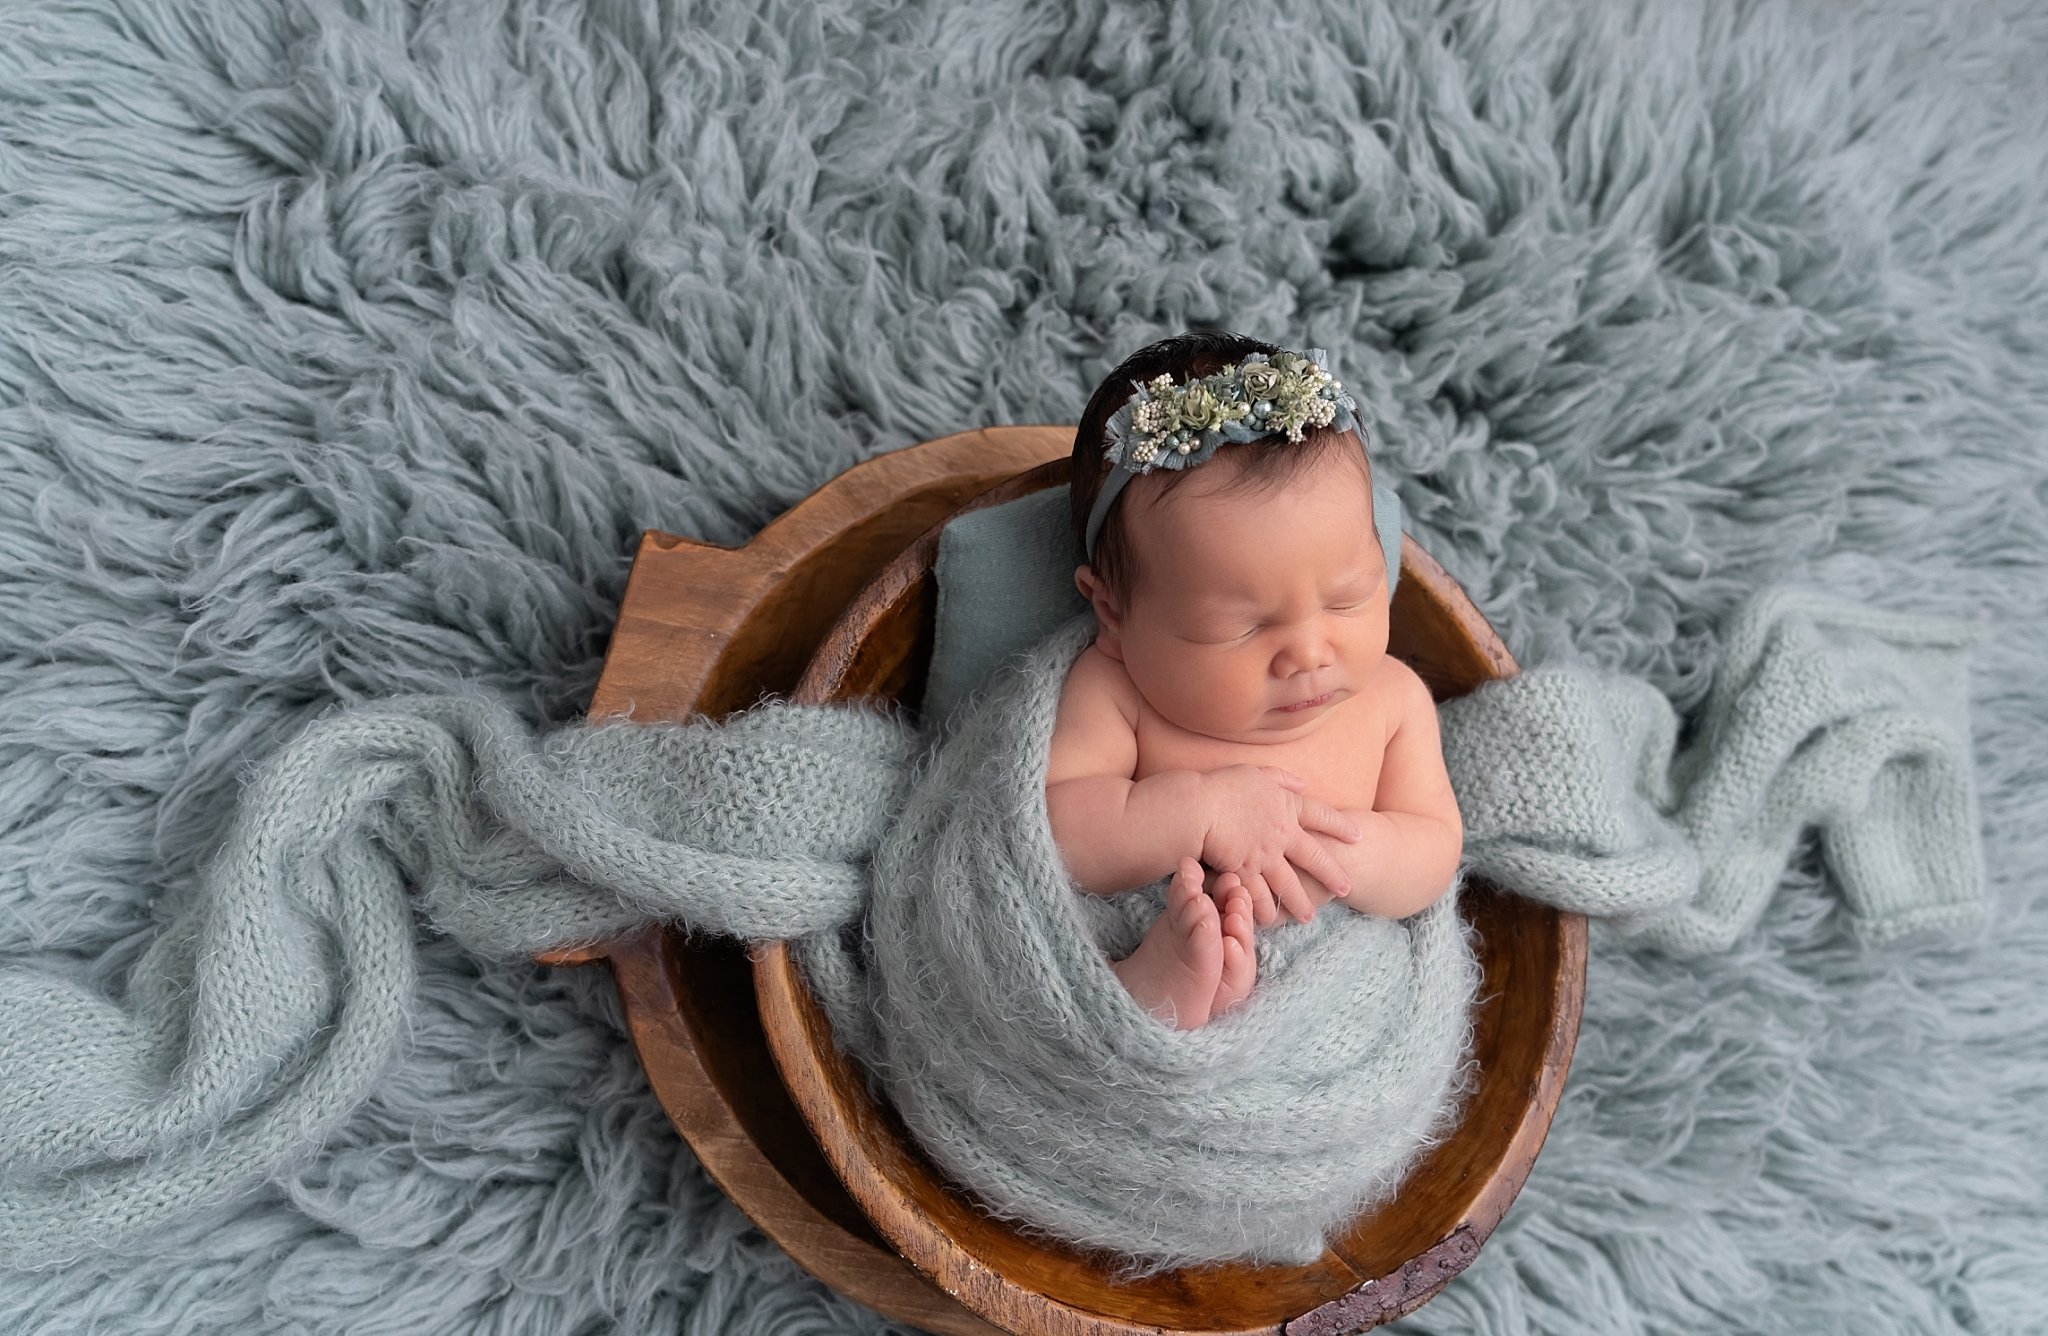 Book a newborn session &amp; receive a FREE MATERNITY Mini Session or MILESTONE session! 

Mini Newborn Session - Just baby being photographed. $399.00
Full Newborn Session - Immediate family, sibling, parent poses, &amp; individual newborn. $459.00
